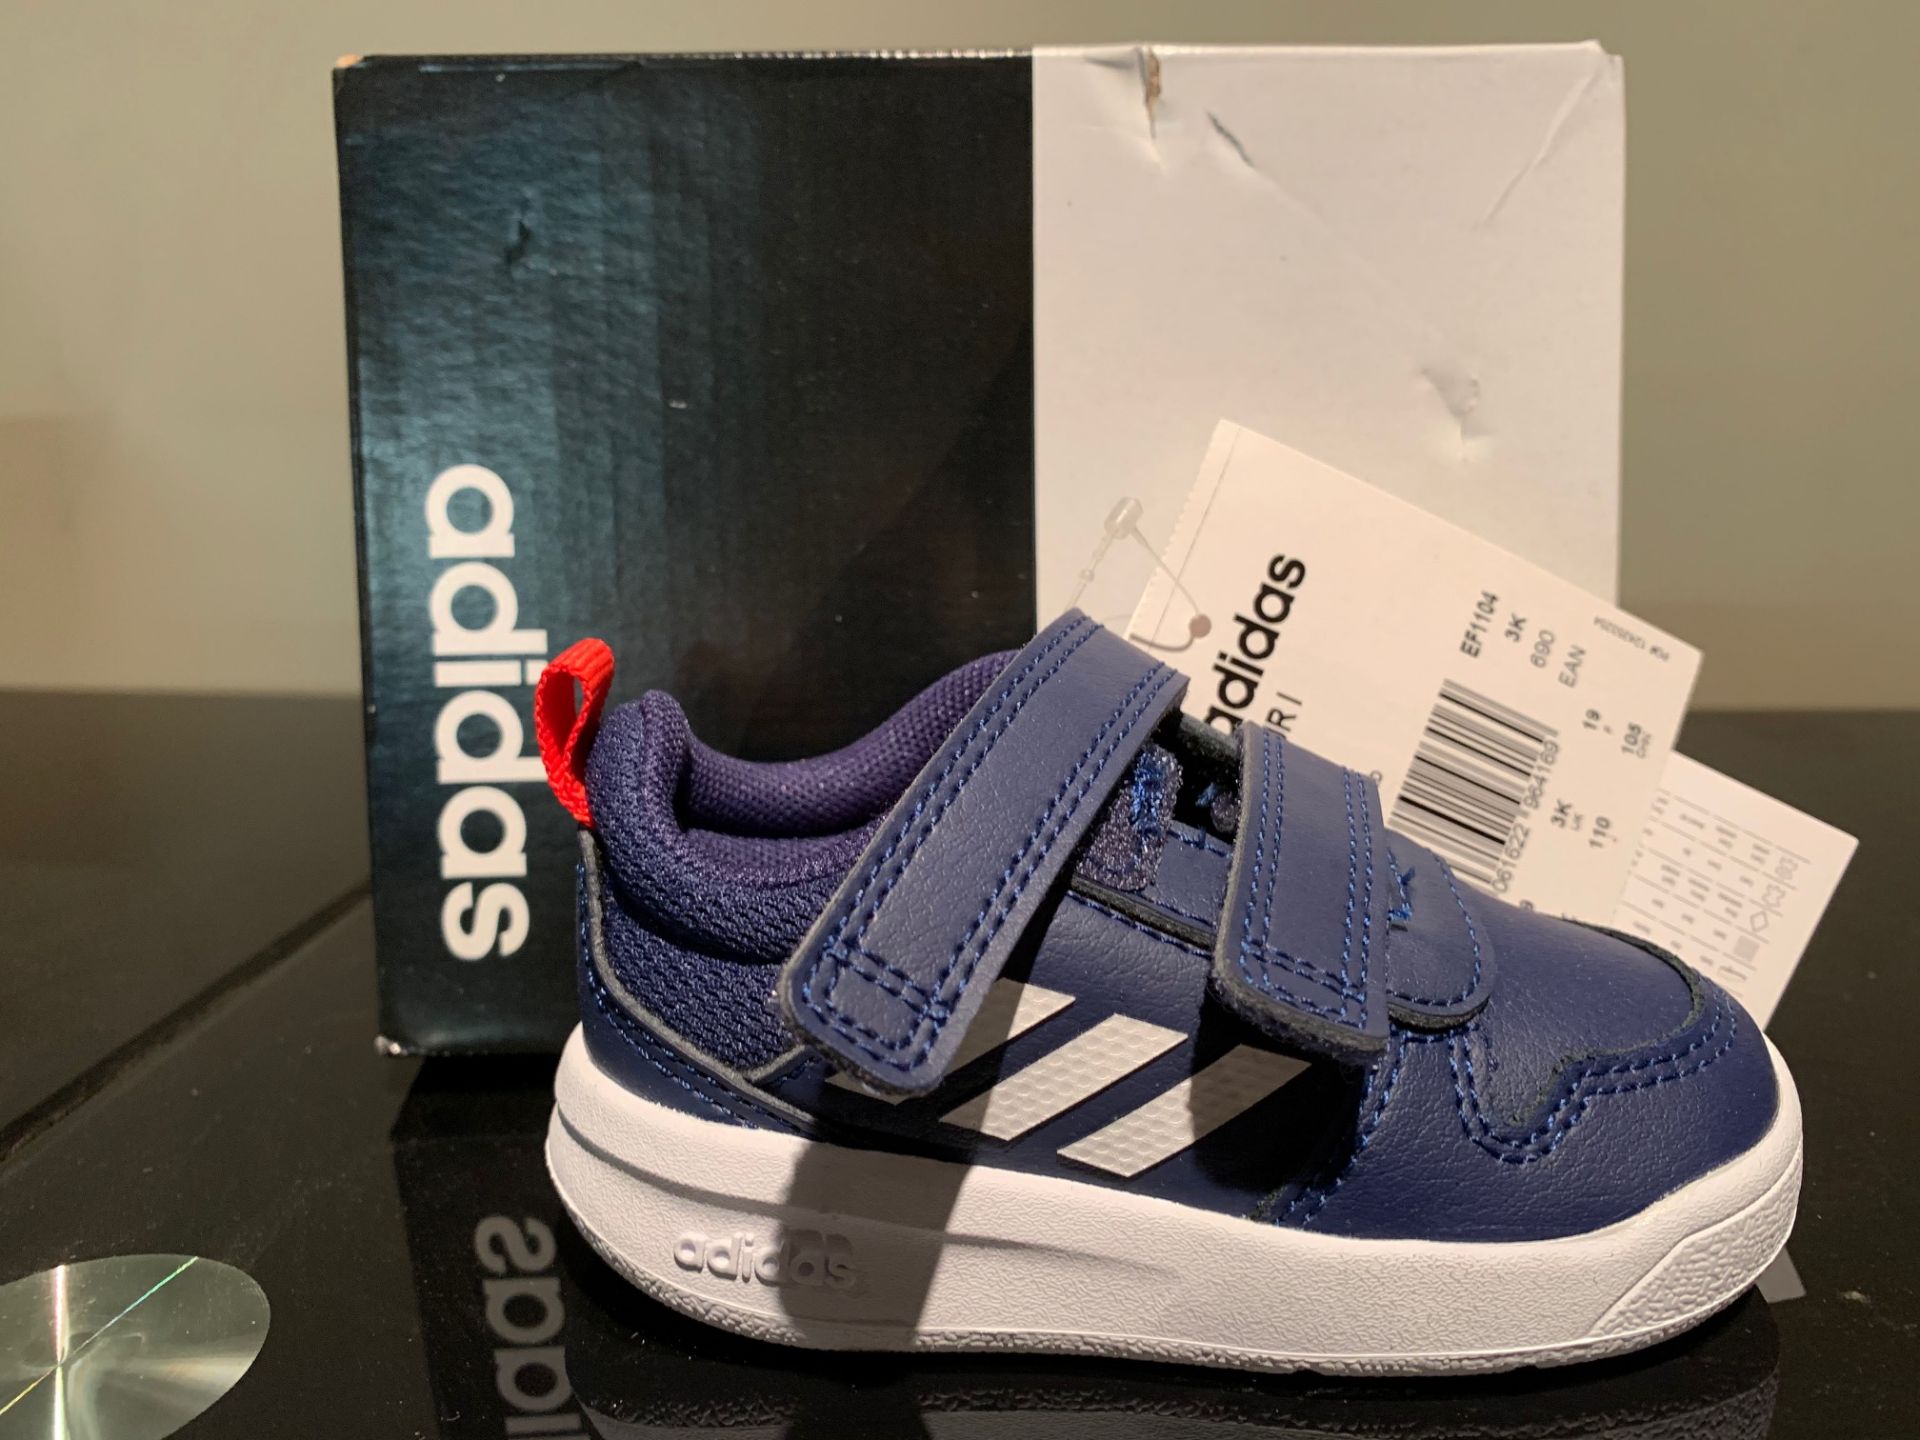 NEW & BOXED ADIDAS TRAINERS SIZE INFANT 3 (273 UPSTAIRS)